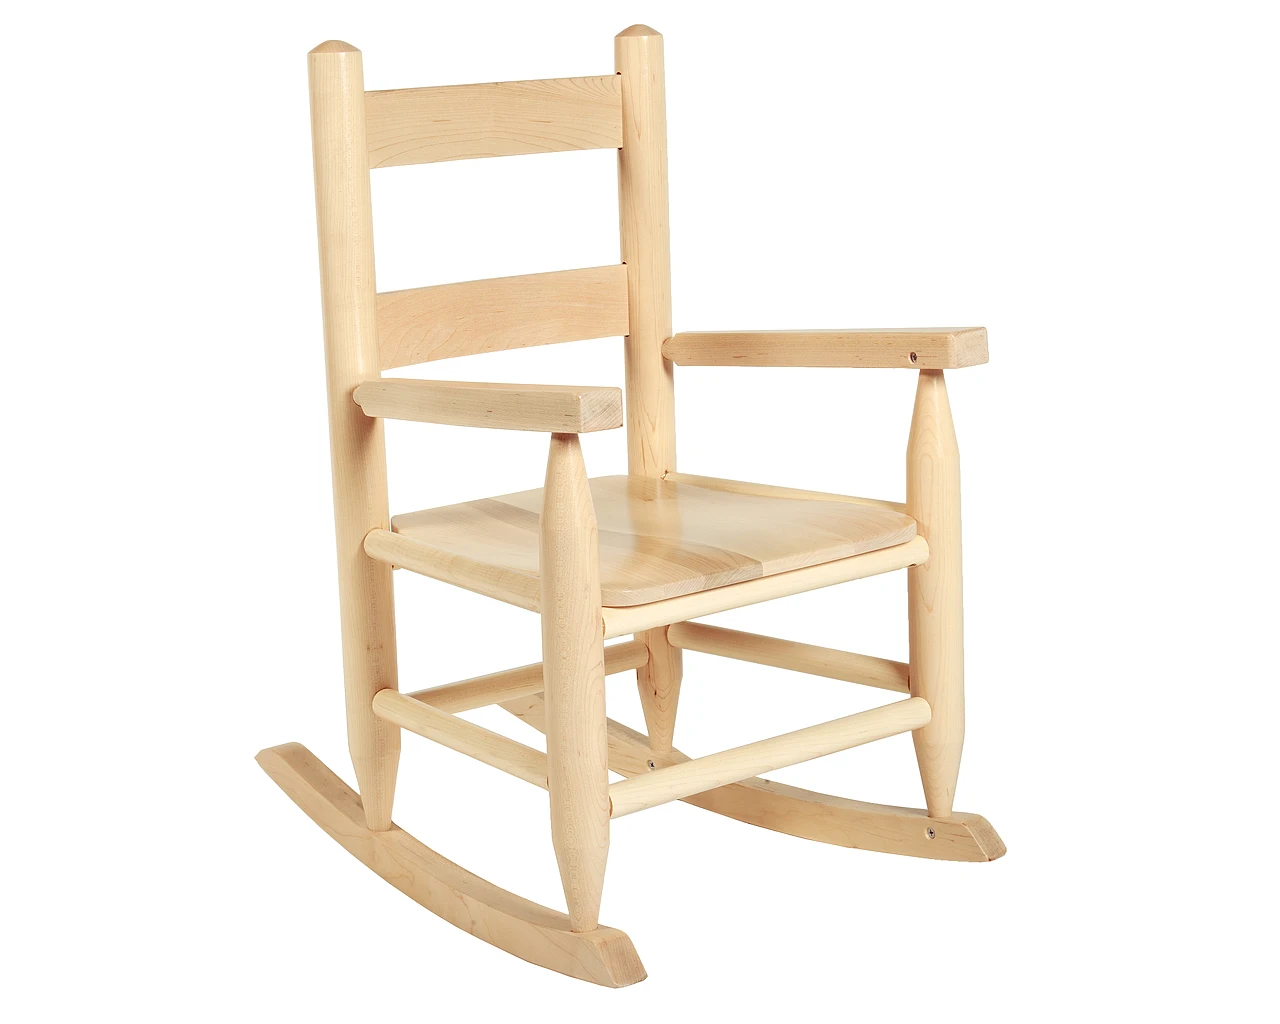 High Quality Children S Furniture Kids Wooden Rocking Chair For